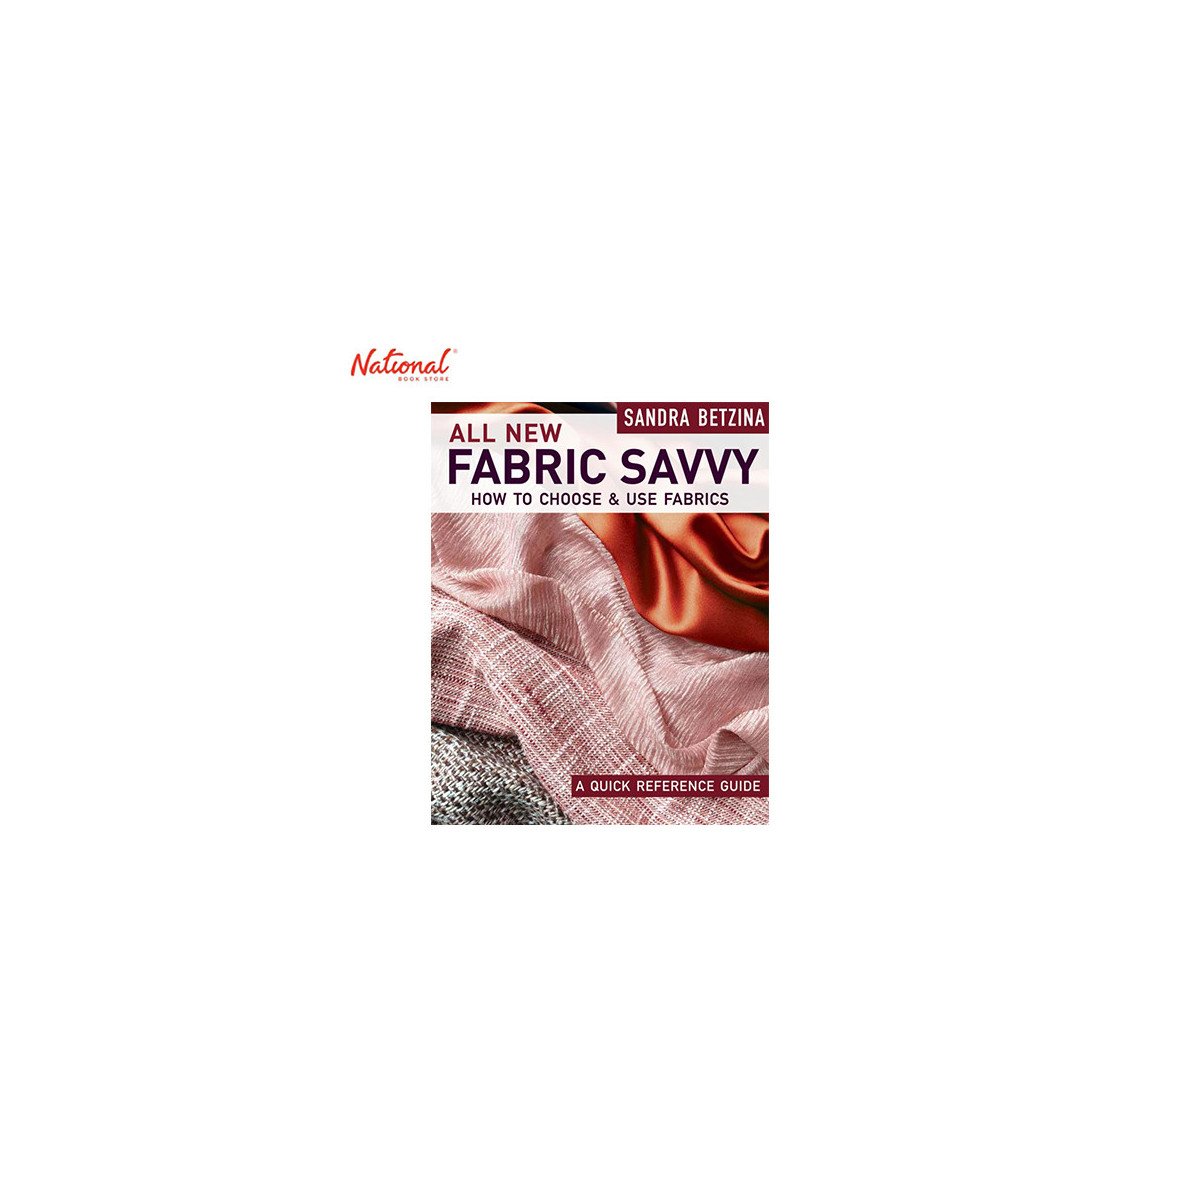 ALL NEW FABRIC SAVVY TRADE PAPERBACK